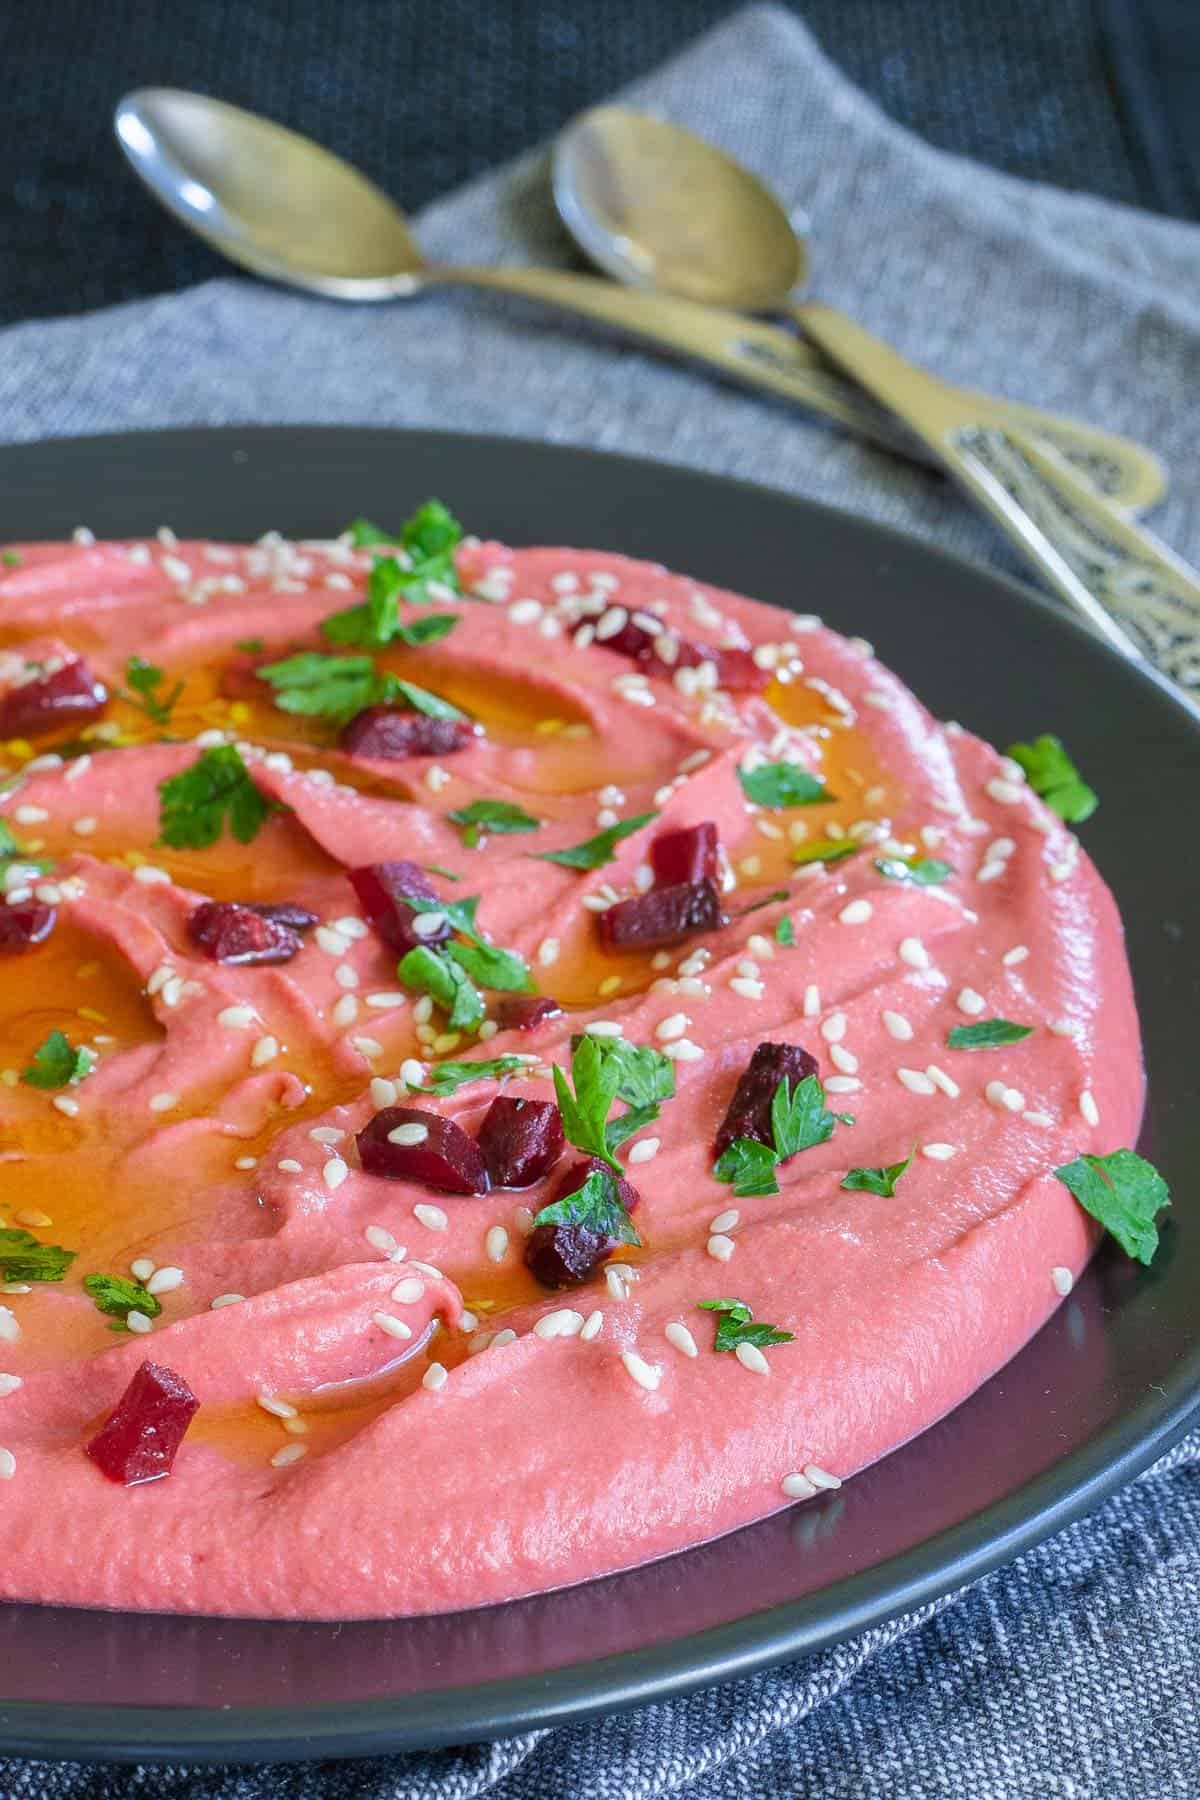 Pink hummus on a black plate, sprinkled with freshly chopped parsley, sesame seeds and small roasted beet pieces.
